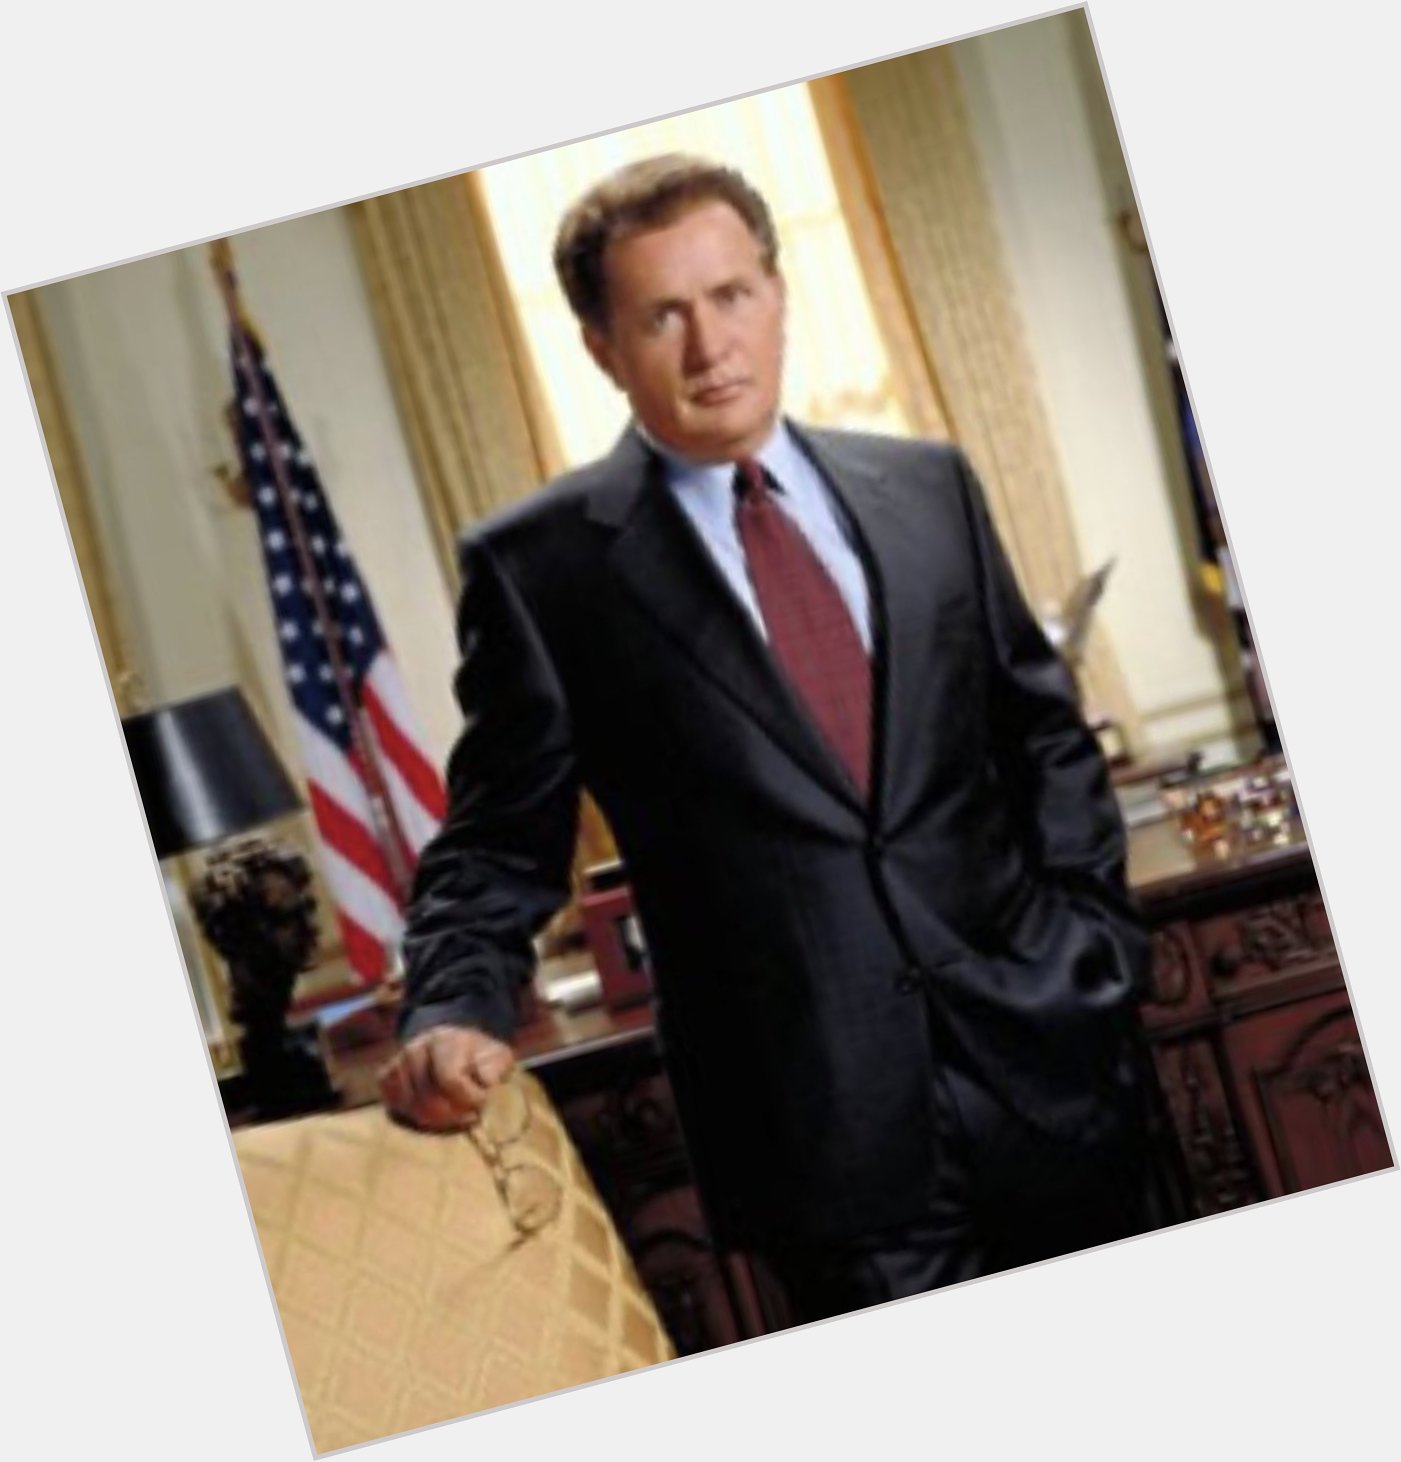 Happy Birthday Martin Sheen. We d be so much better off with a Bartlett presidency than what we have now 